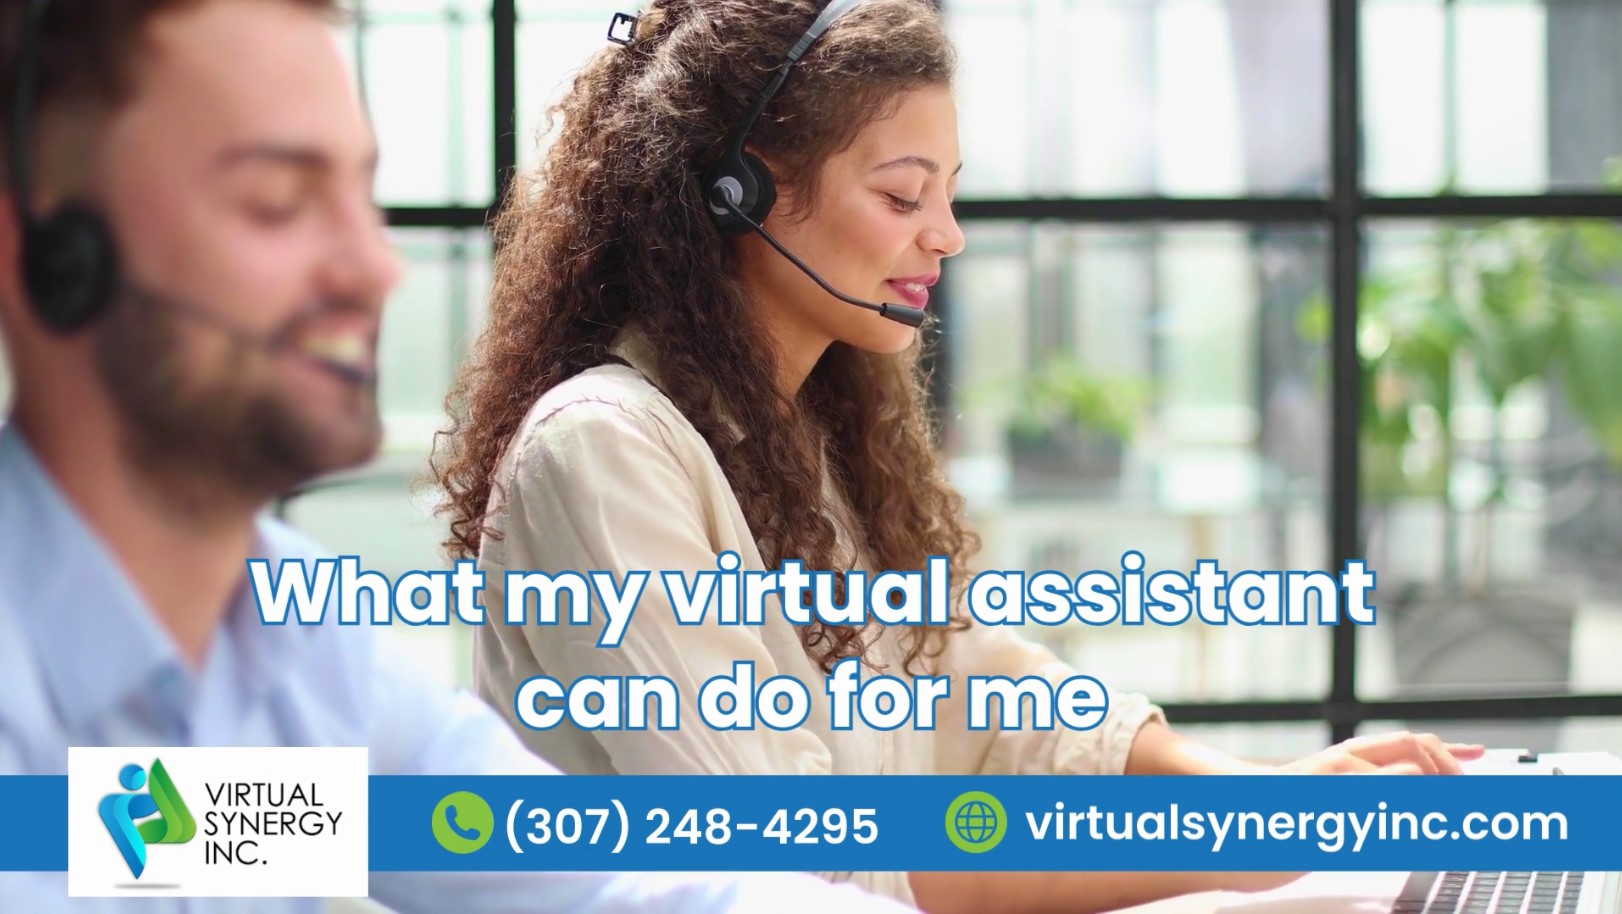 What my virtual assistant can do for me? At Virtual Synergy, our virtual assistants are adept at handling a diverse range of tasks.